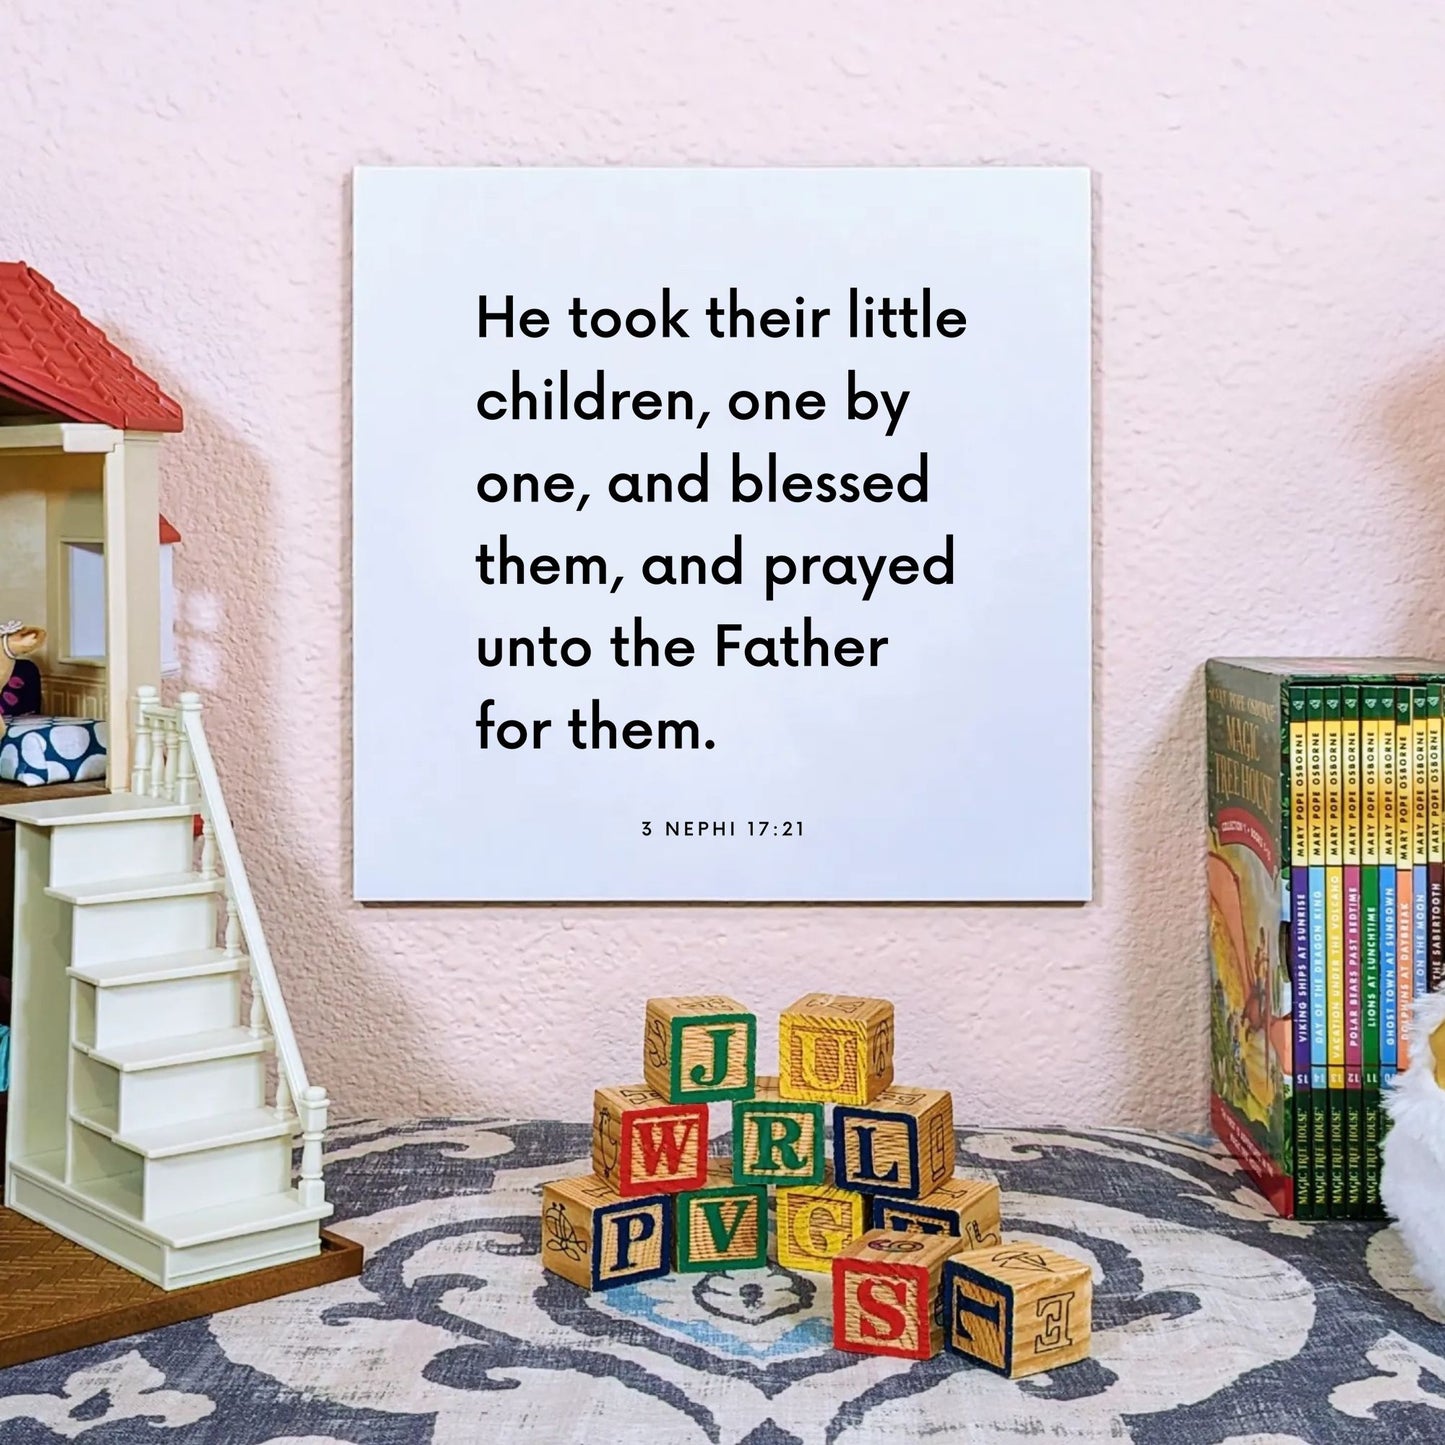 Playroom mouting of the scripture tile for 3 Nephi 17:21 - "He took their little children, one by one"